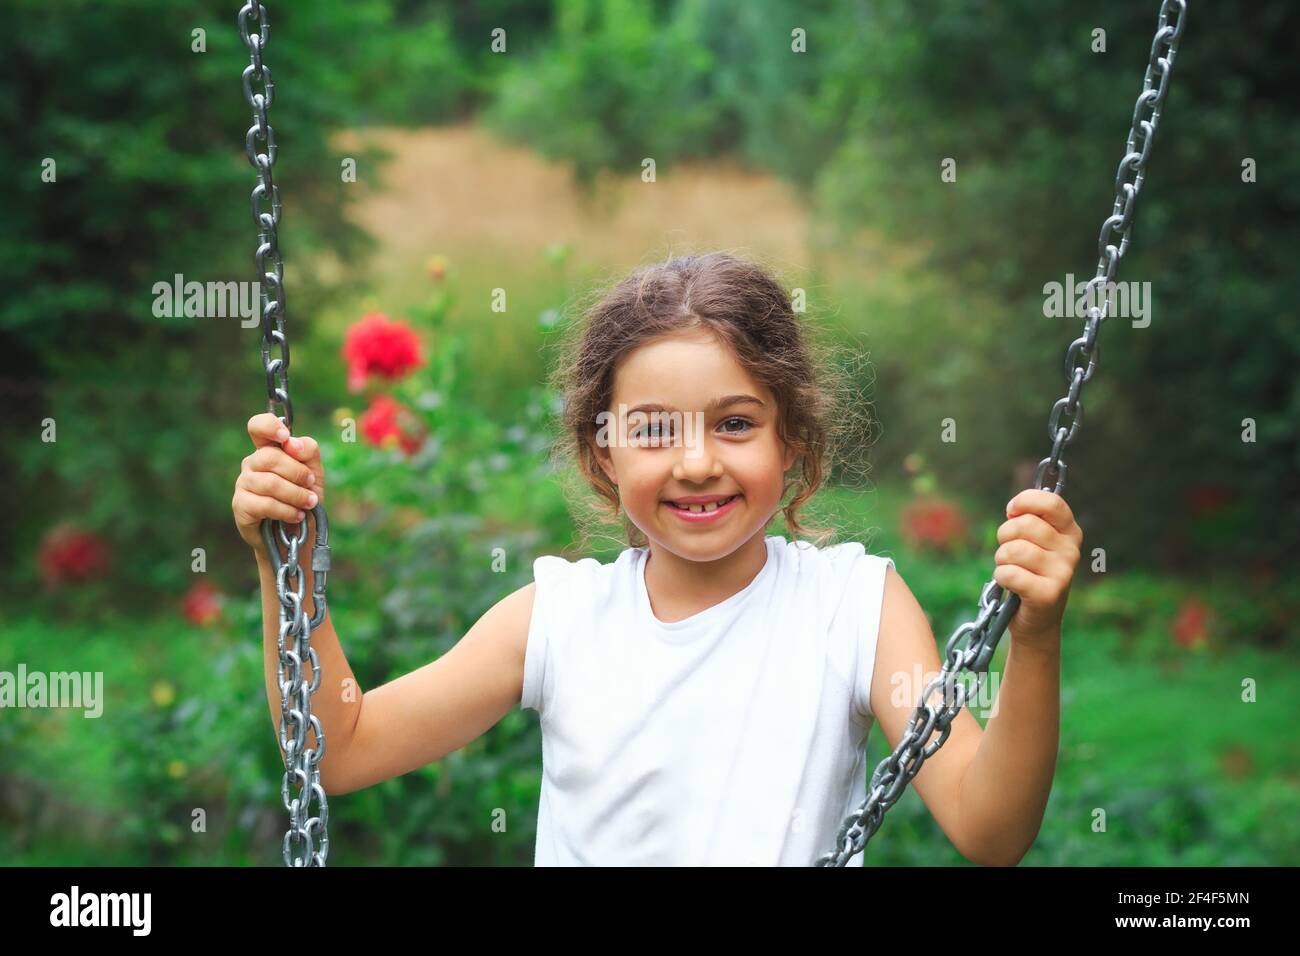 Child playing on outdoor playground. Kids play on school or kindergarten yard. Active kid on colorful swing. Healthy summer activity for children in s Stock Photo